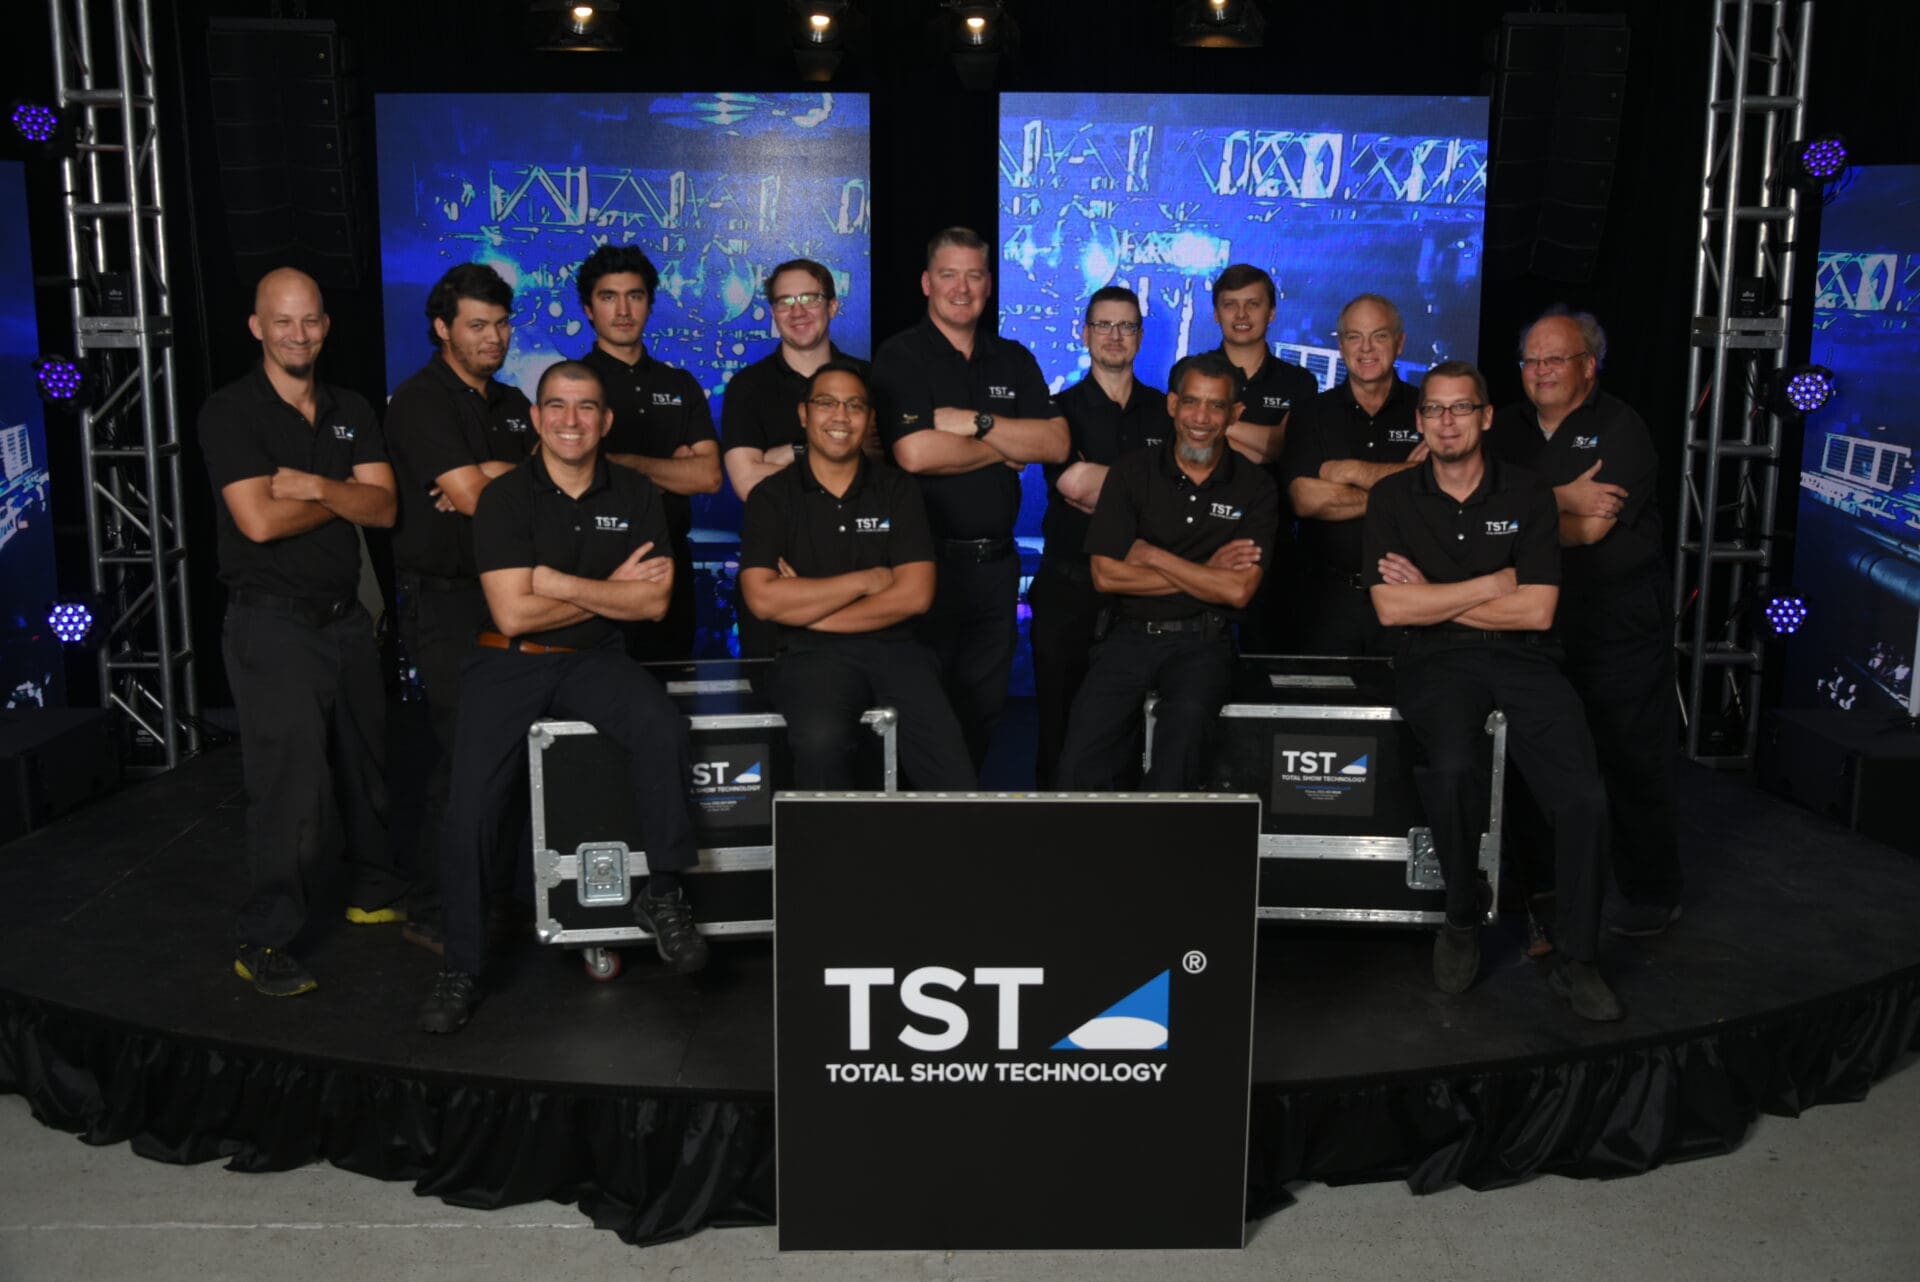 Dedicated Team Behind Total Show Technology